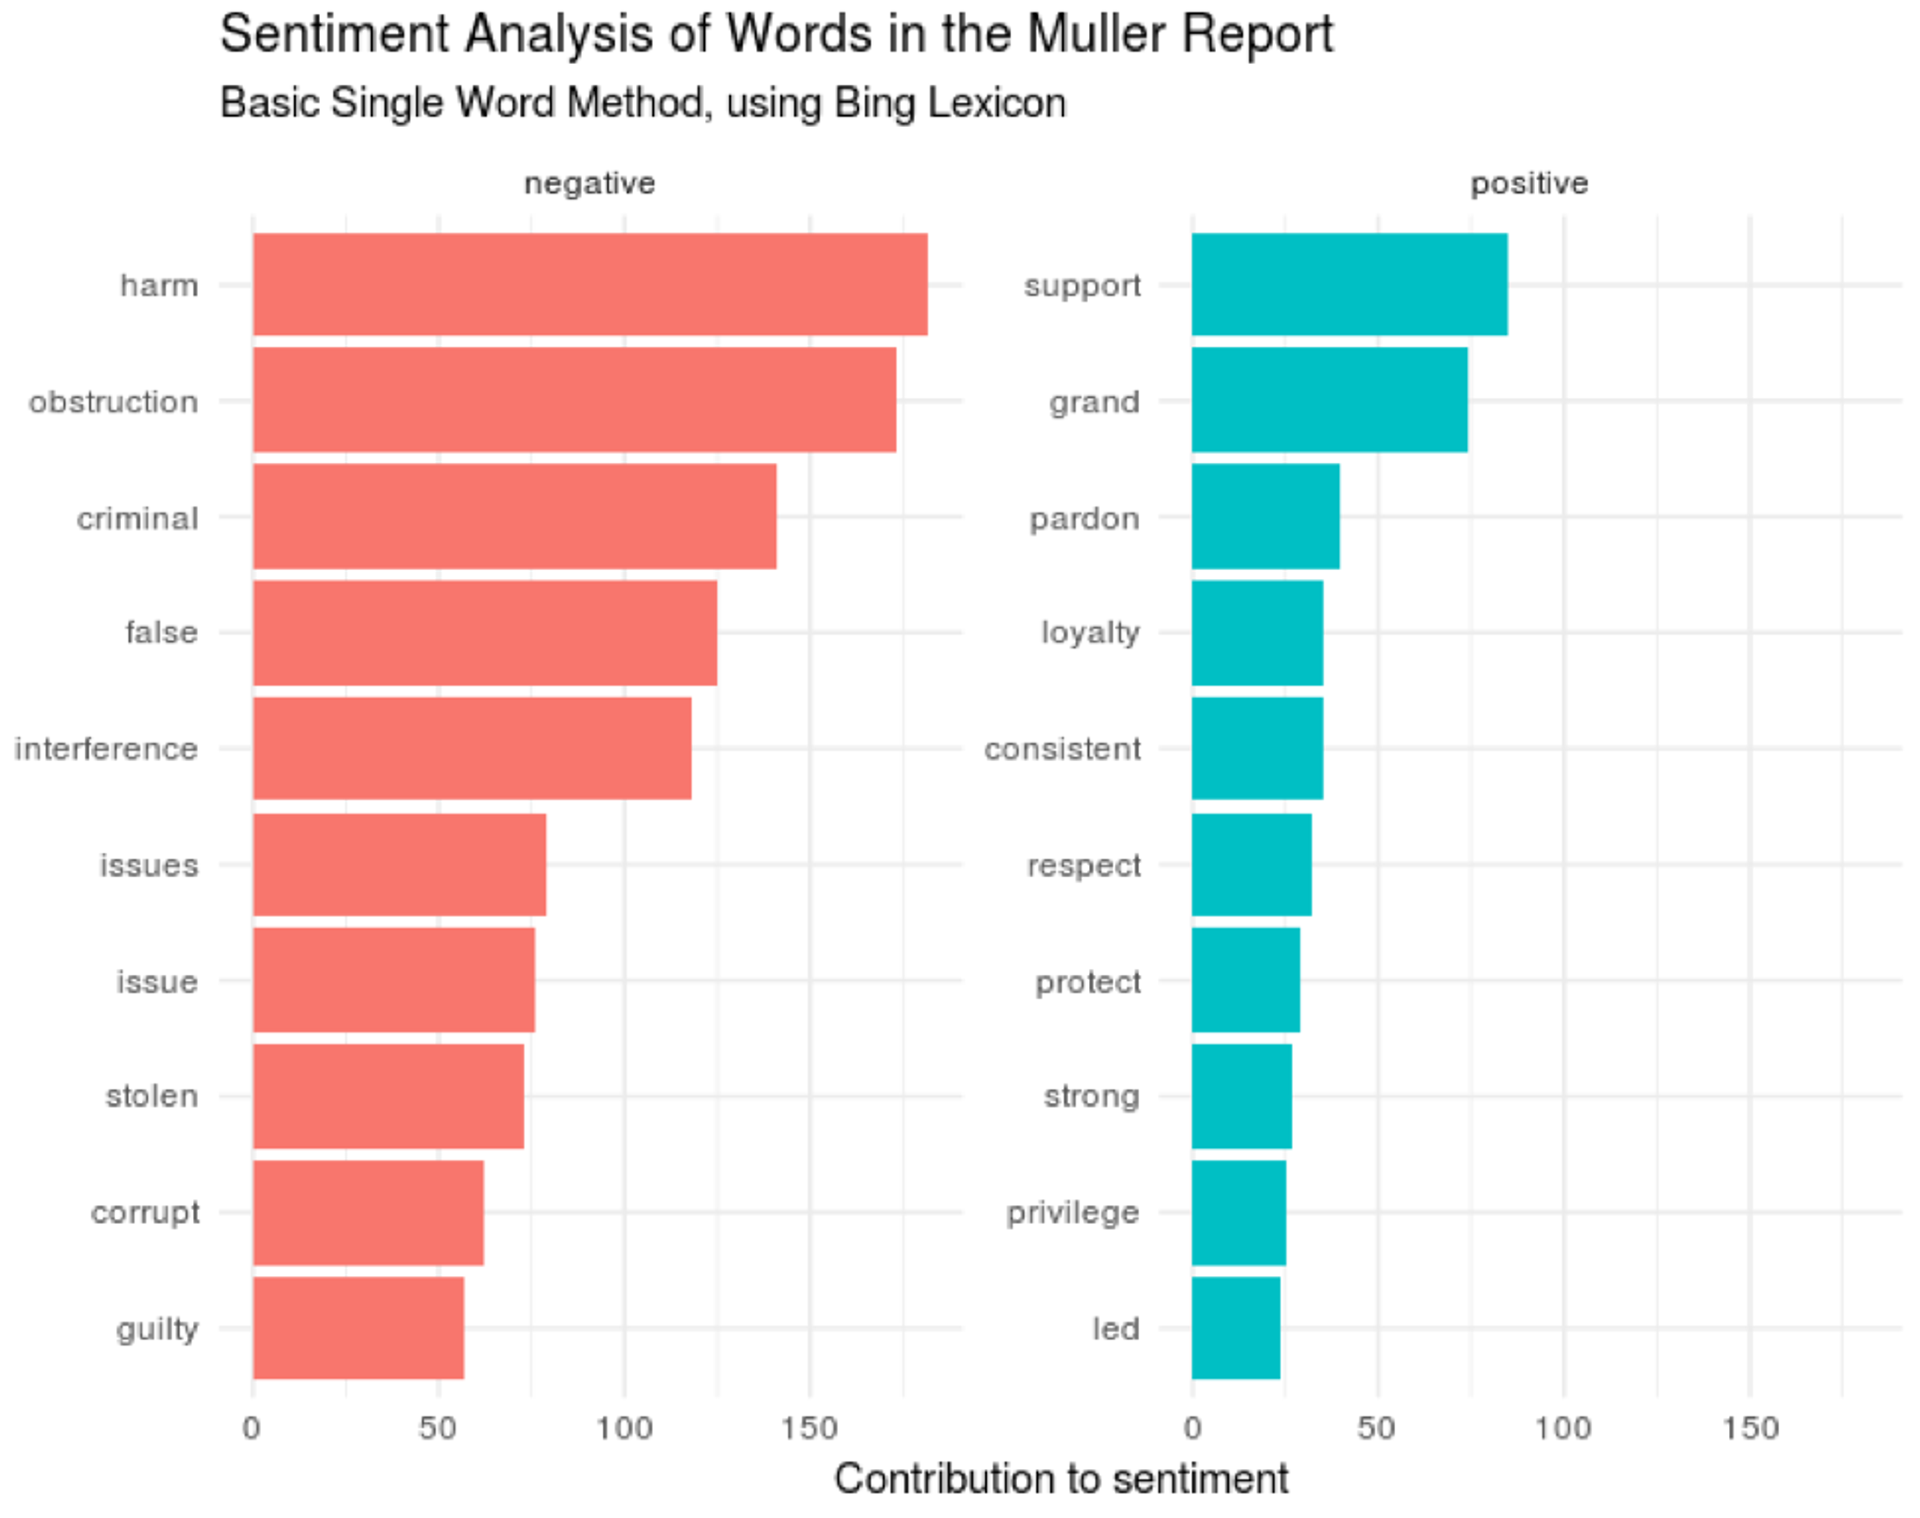 Sentiment Analysis of Words in the Mueller Report